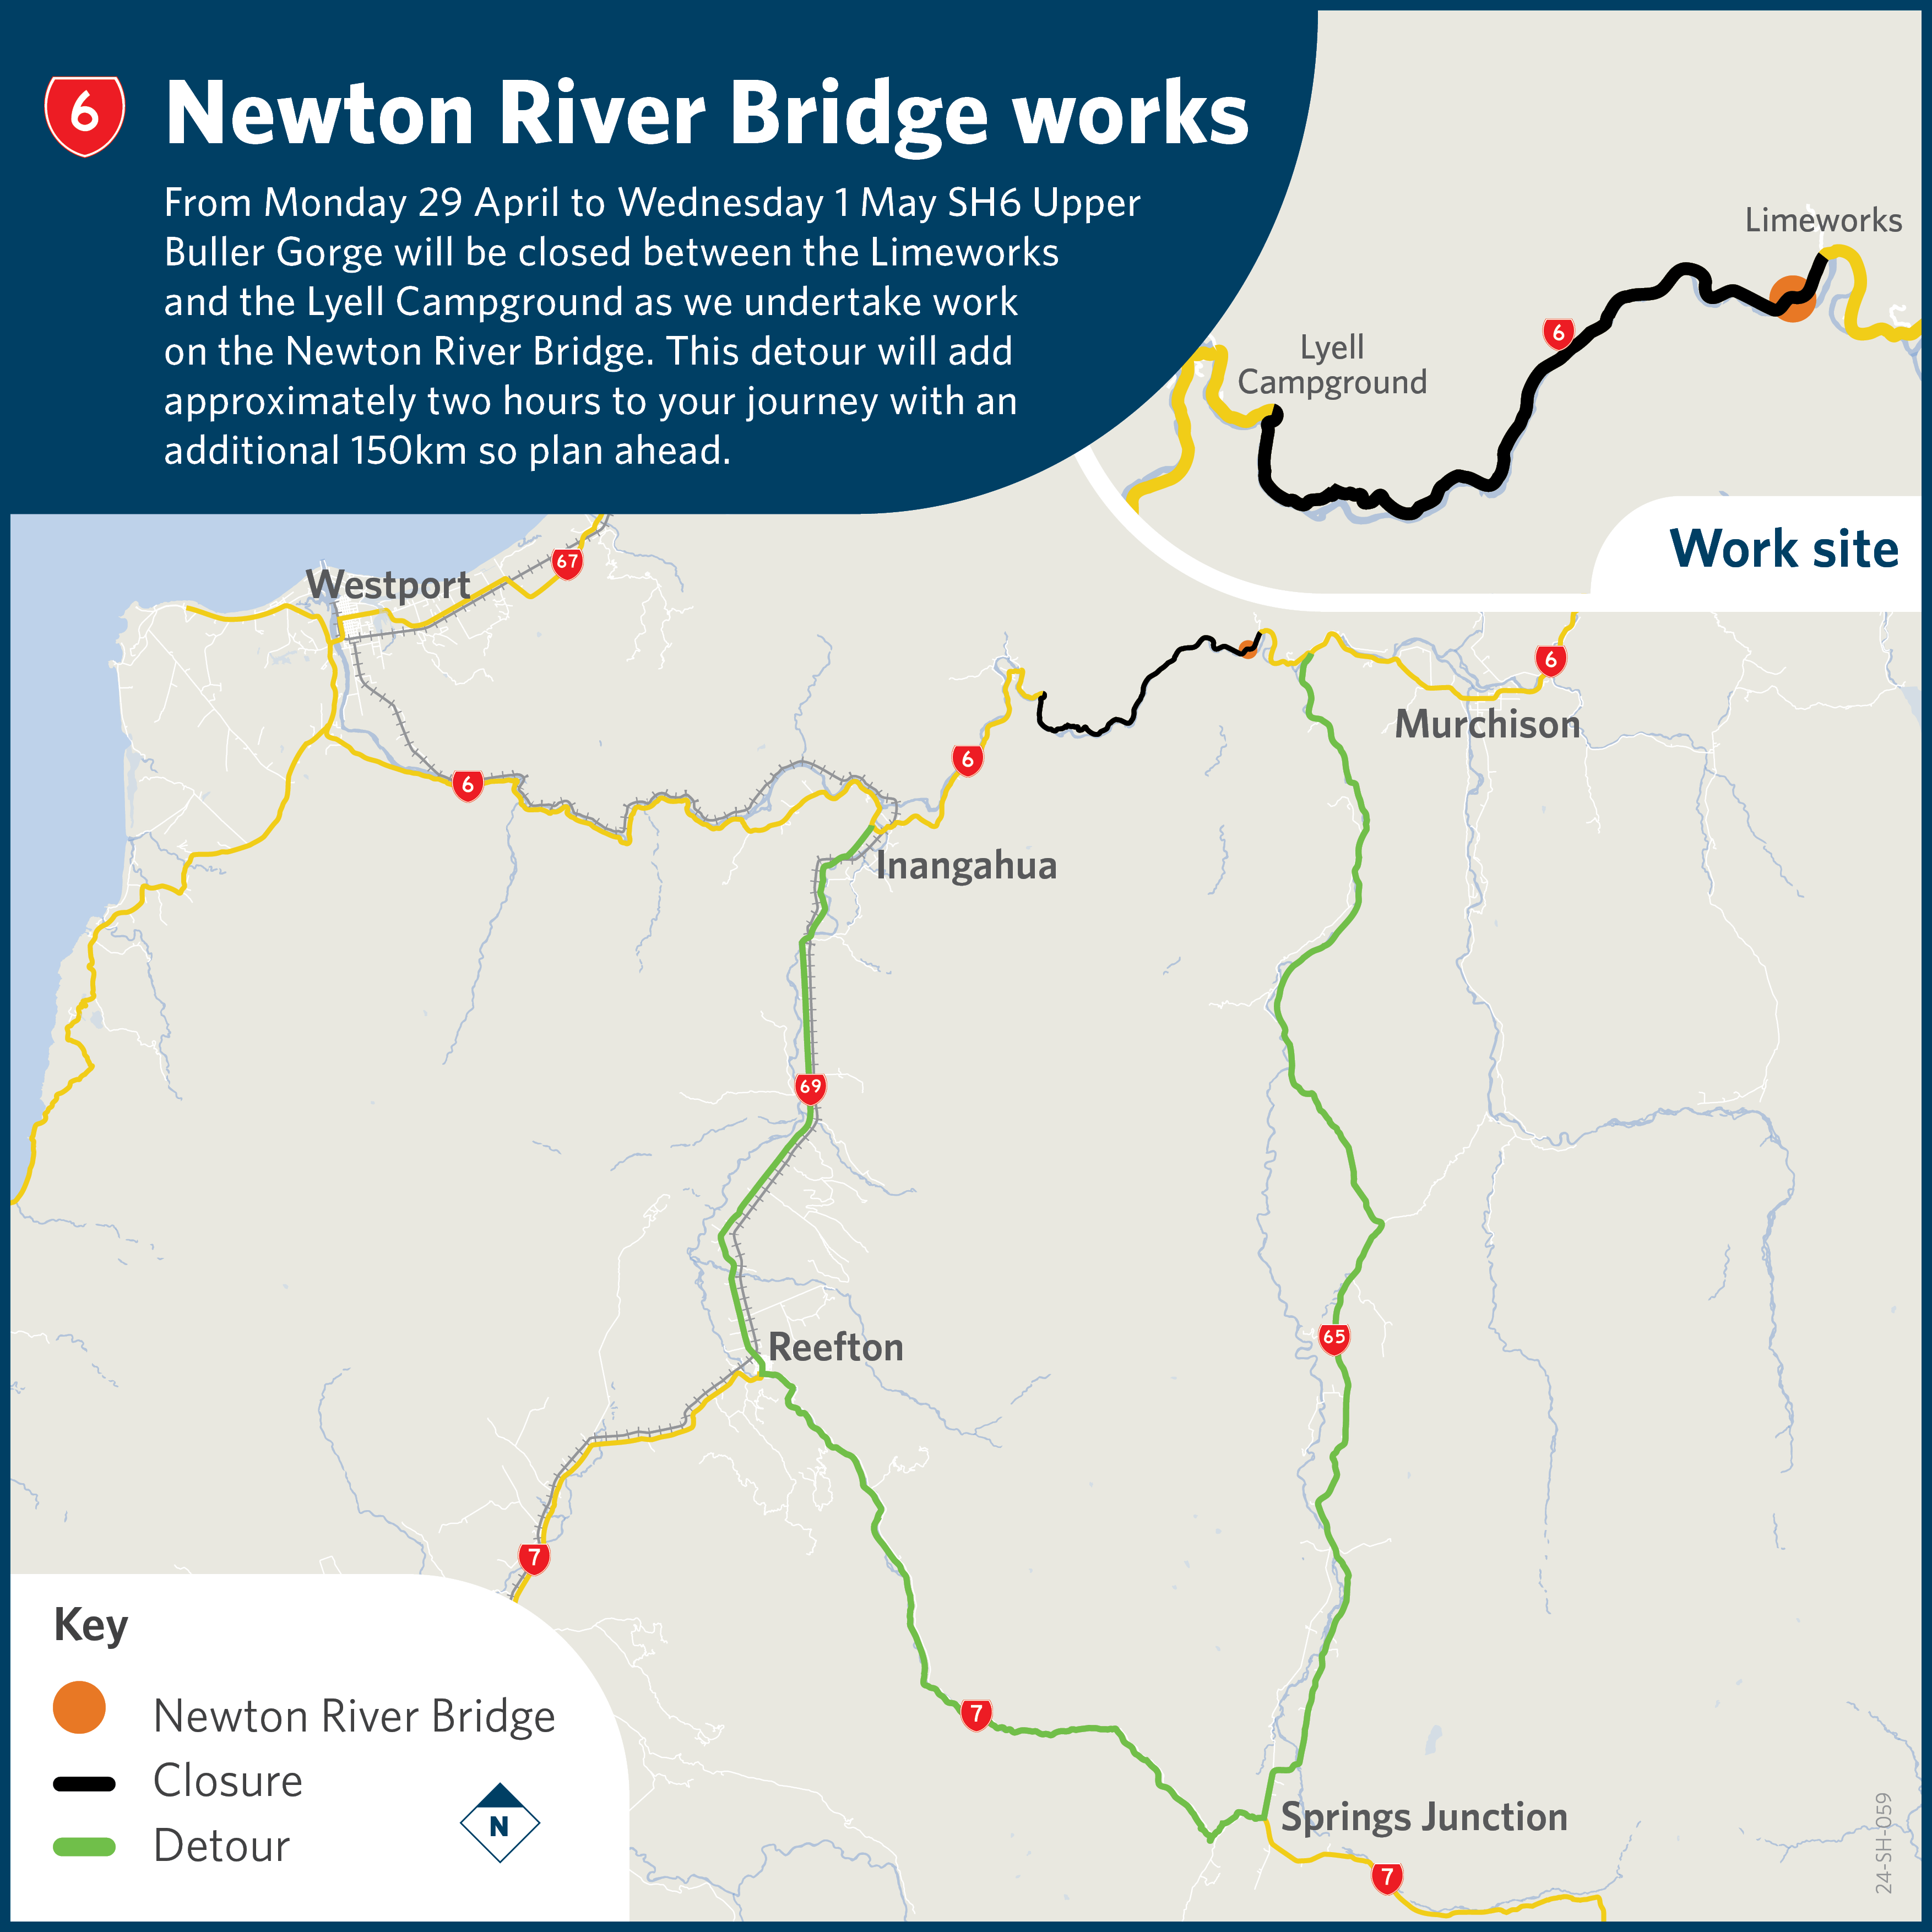 From Monday 29 April to Wednesday 1 May SH6 Upper Buller Gorge will be closed between the Limeworks and the Lyell Campground as we undertake work on the Newton River Bridge. This detour will add approximately two hours to your journey with an additional 1